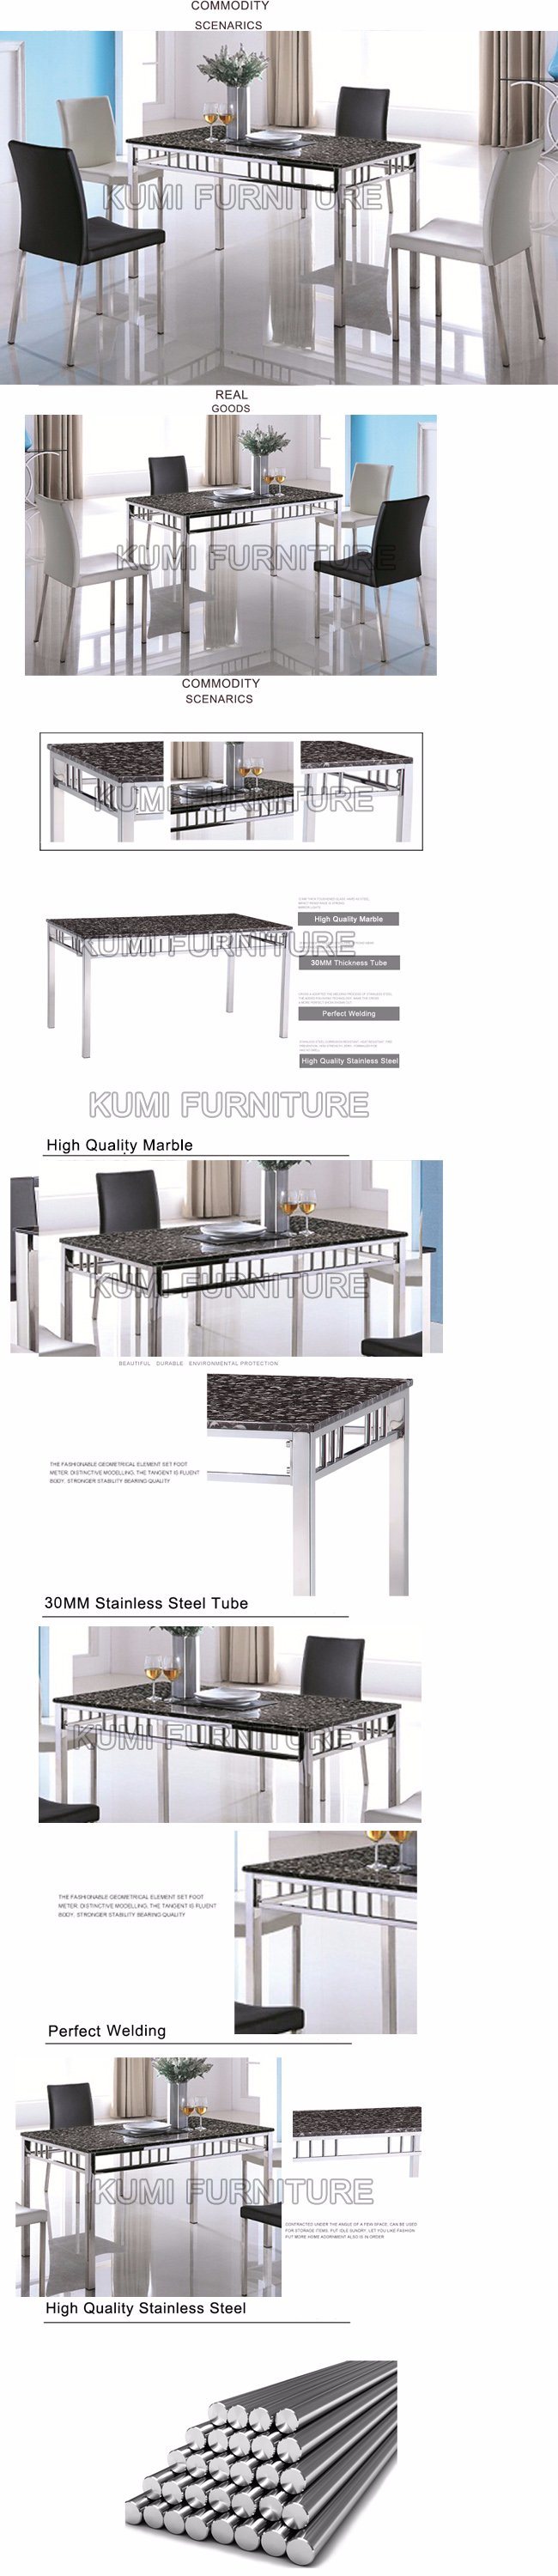 Simple Designs Dining Table for Stainless Steel